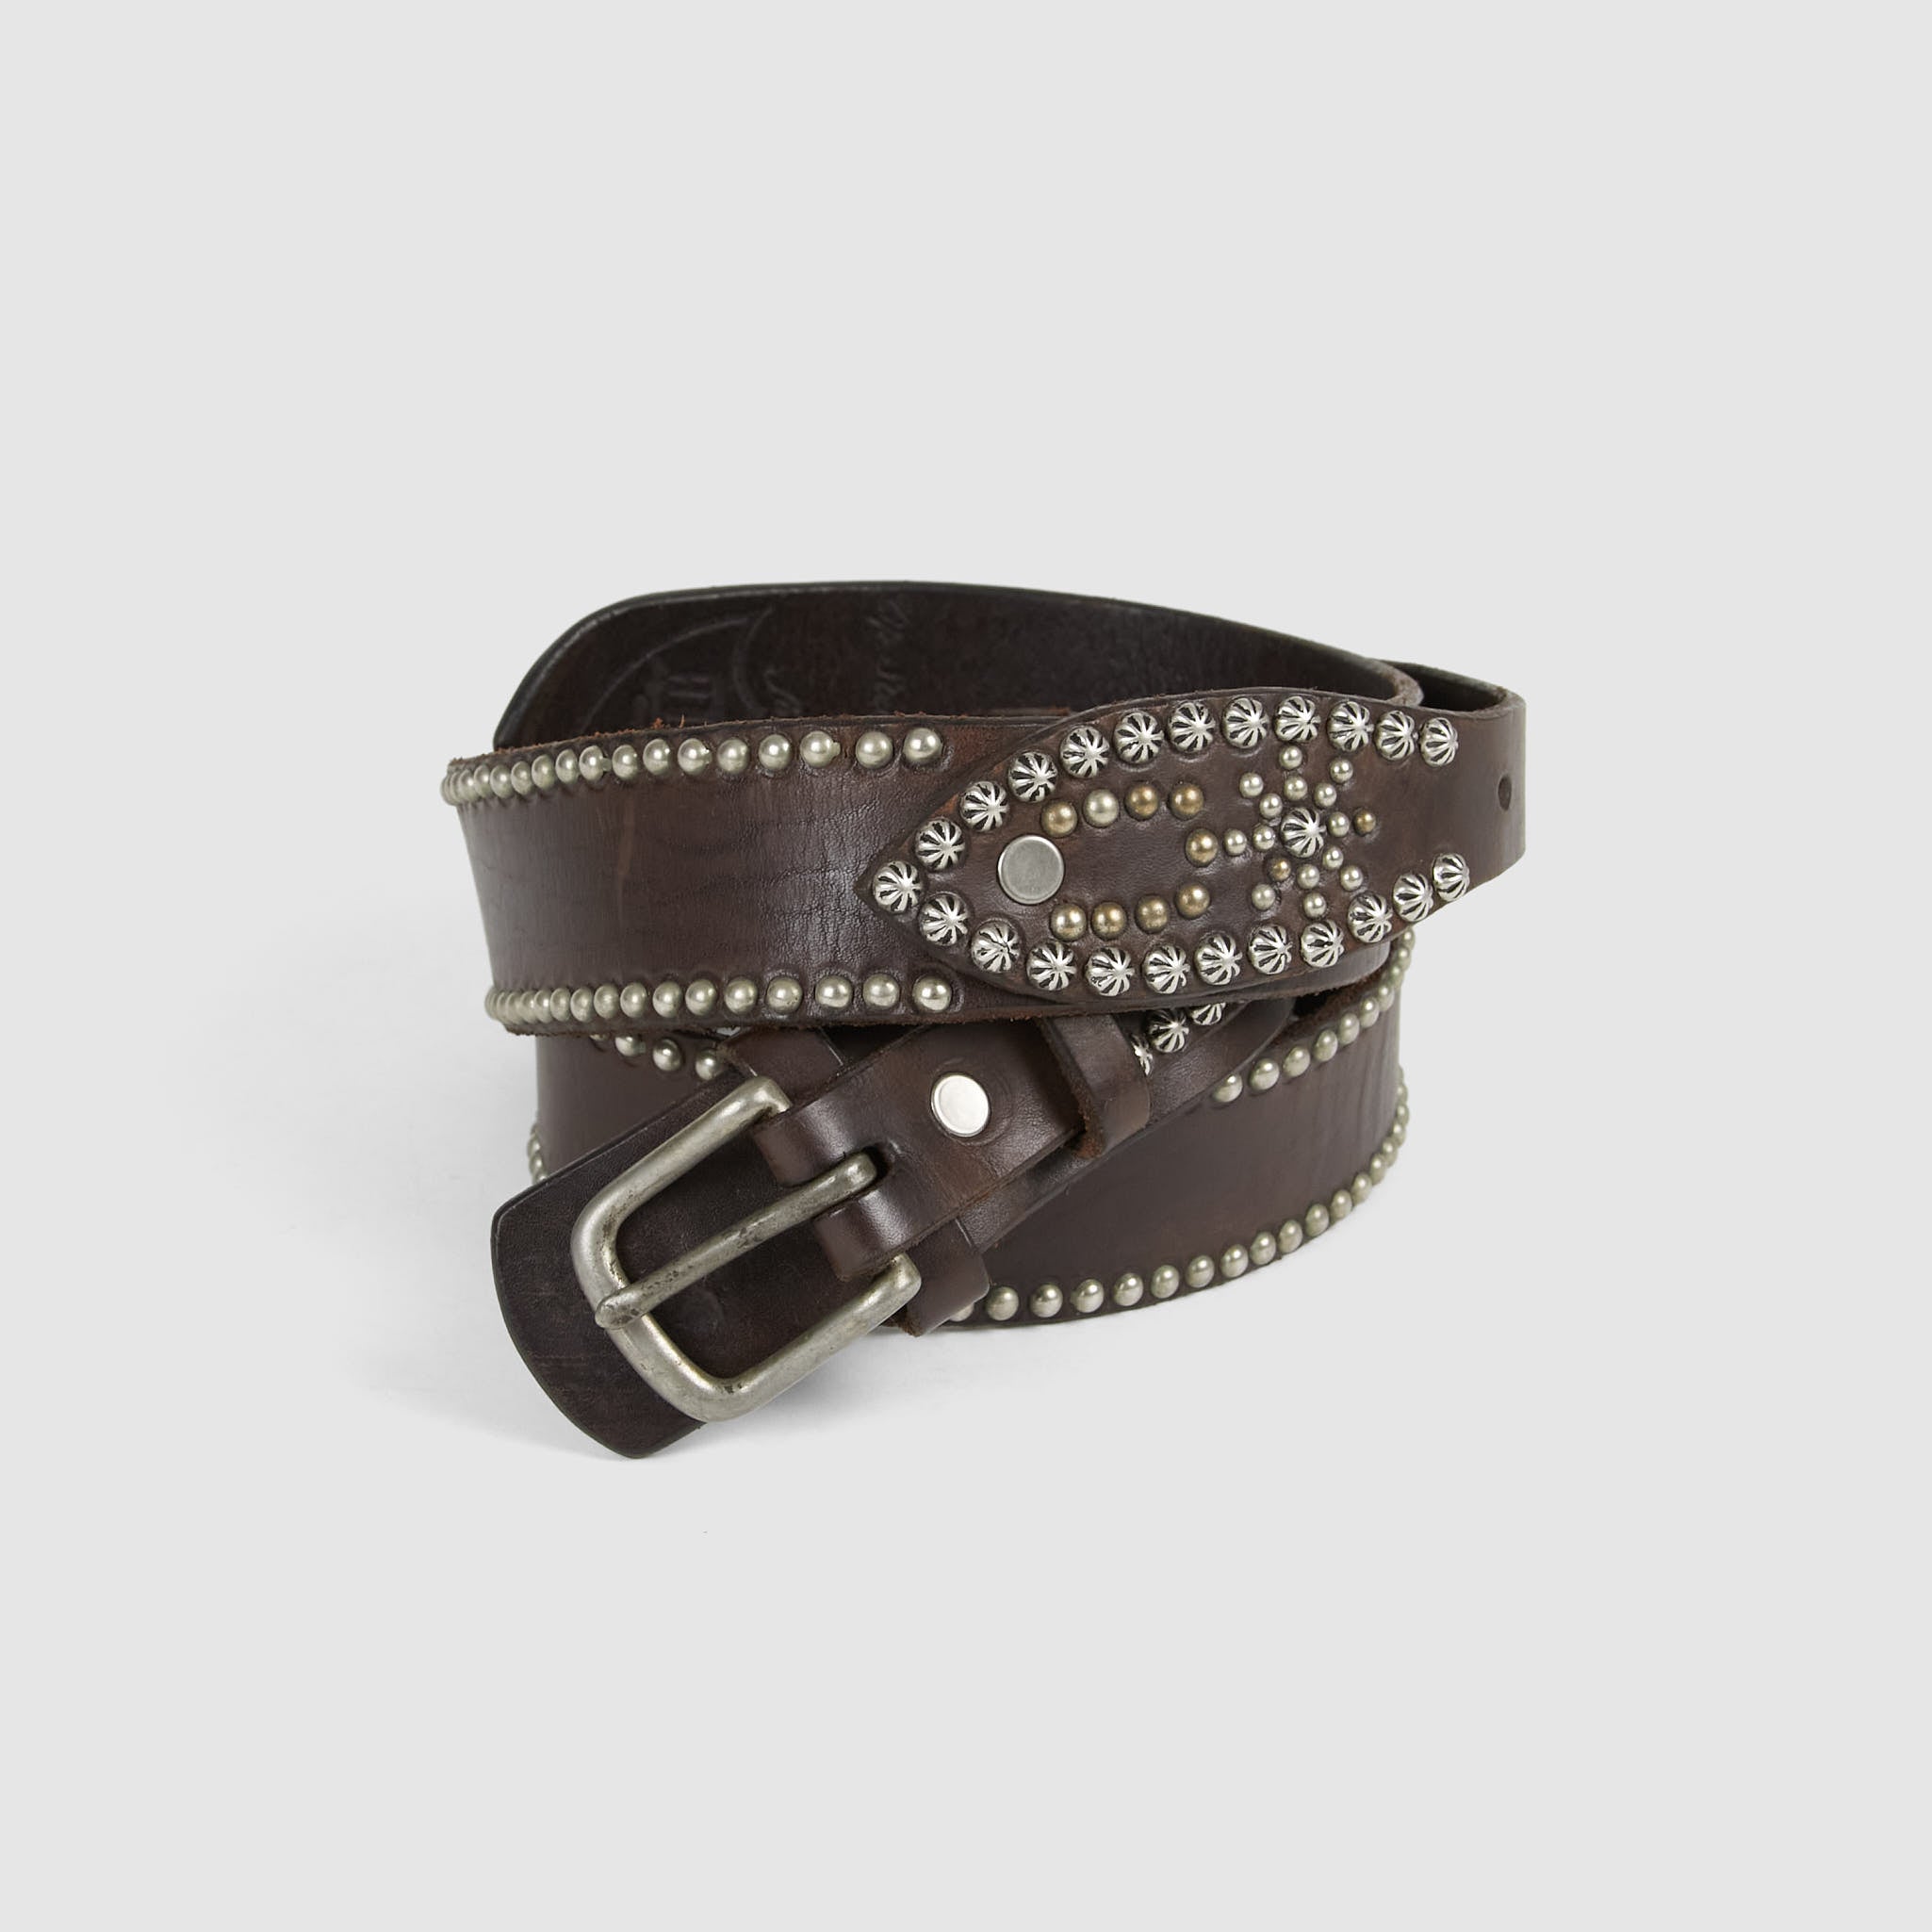 HTC Leather Ranch Belt with Studs - DeeCee style